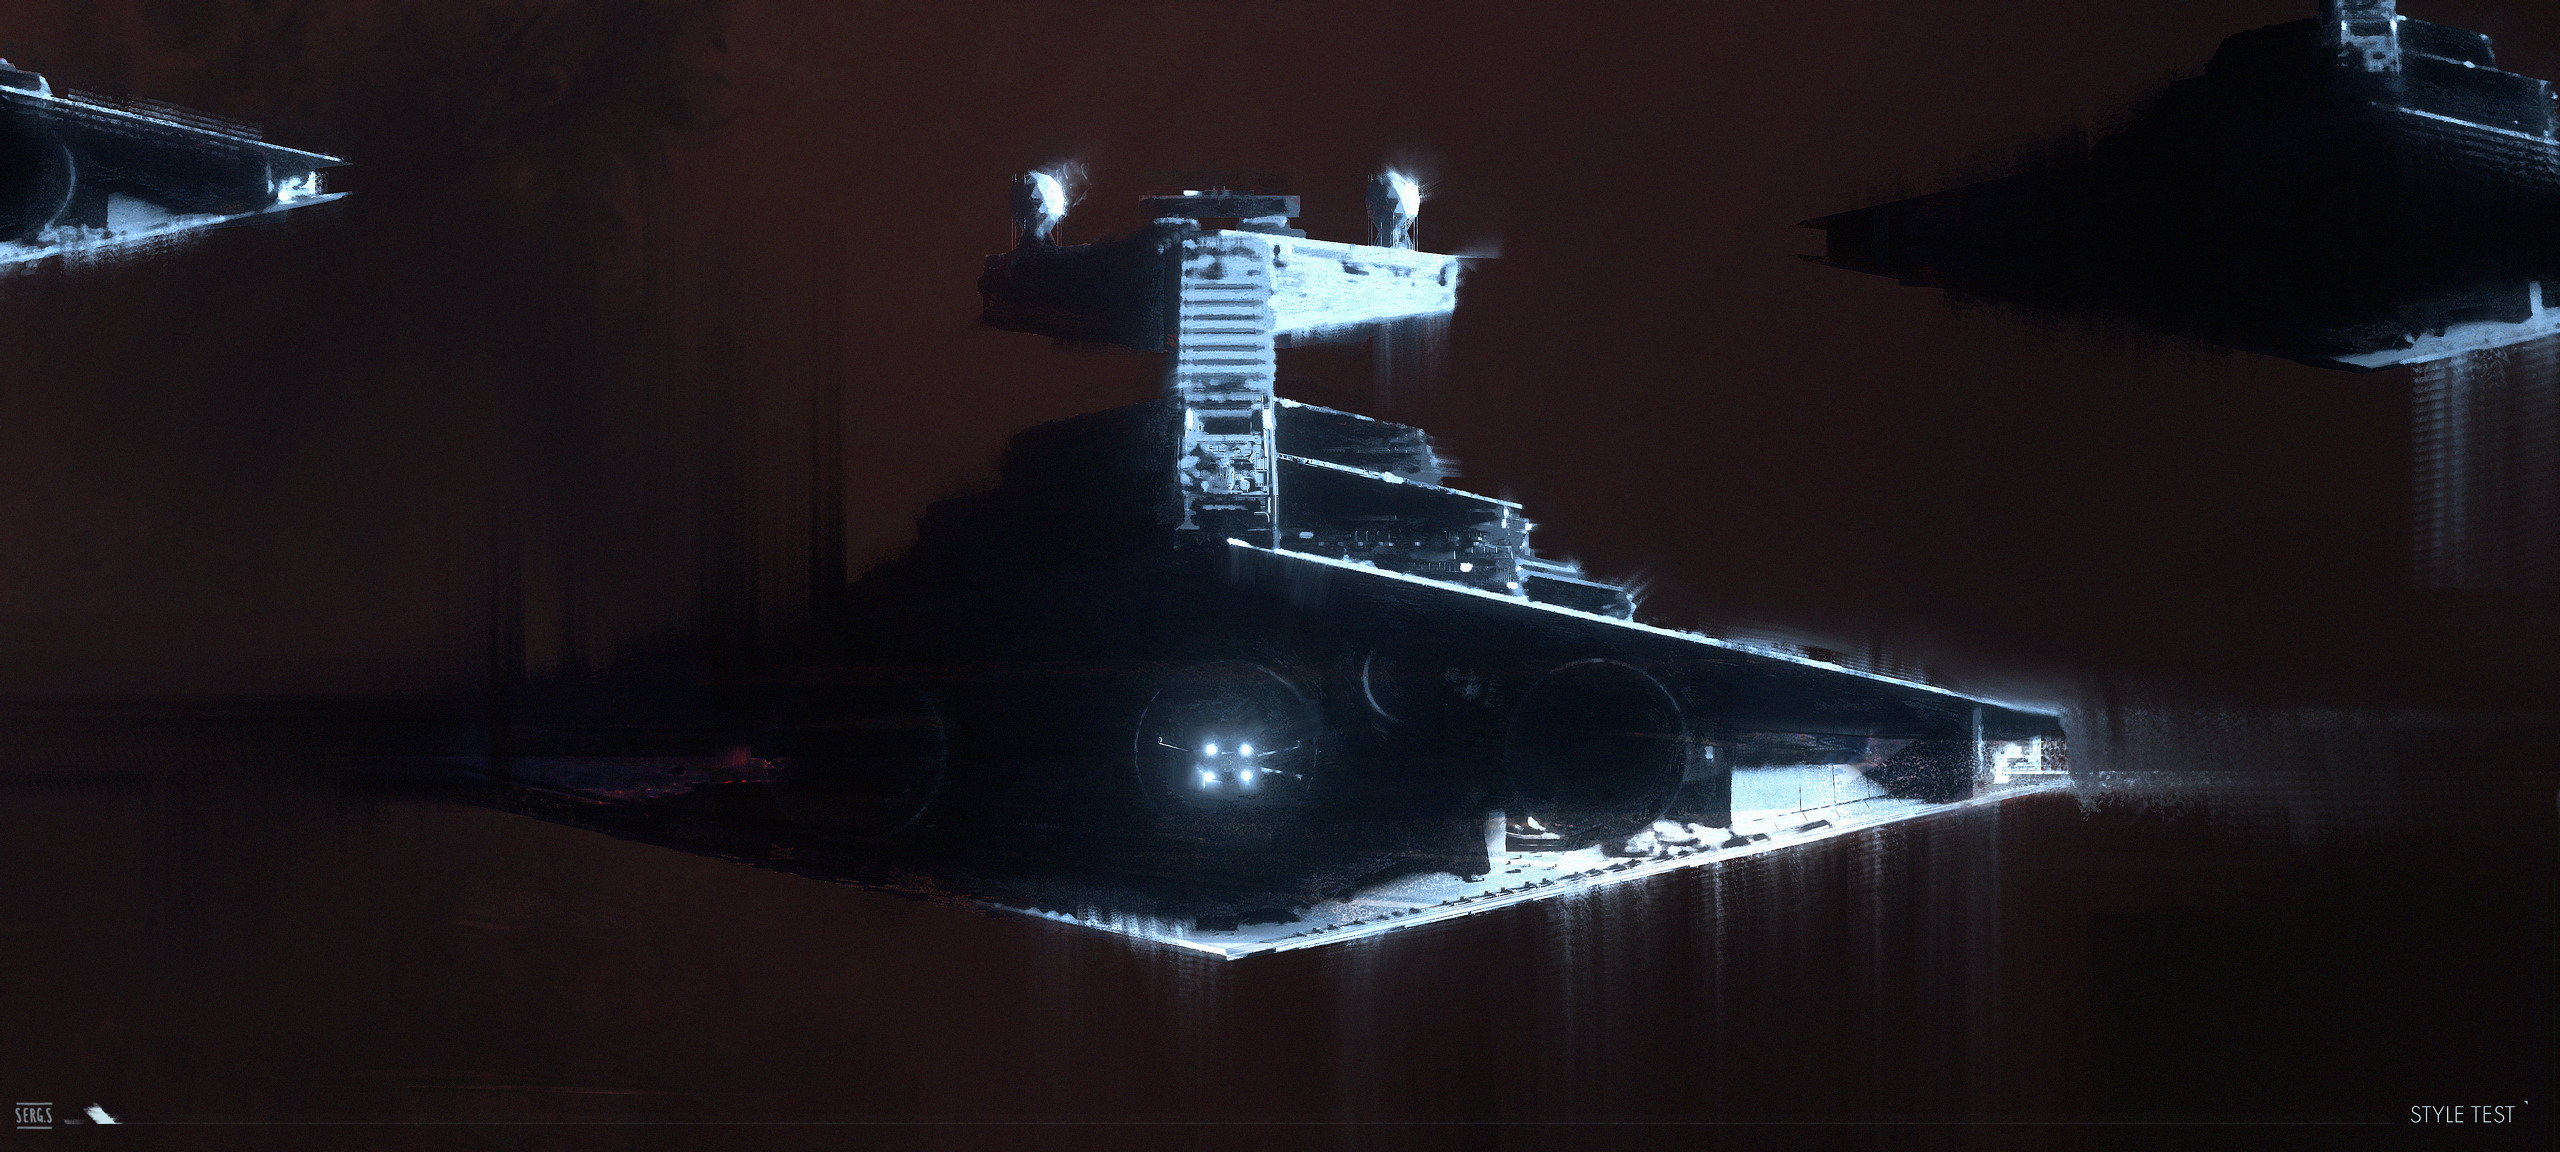 General 2560x1152 Star Wars artwork spaceship Imperial Forces Star Destroyer science fiction